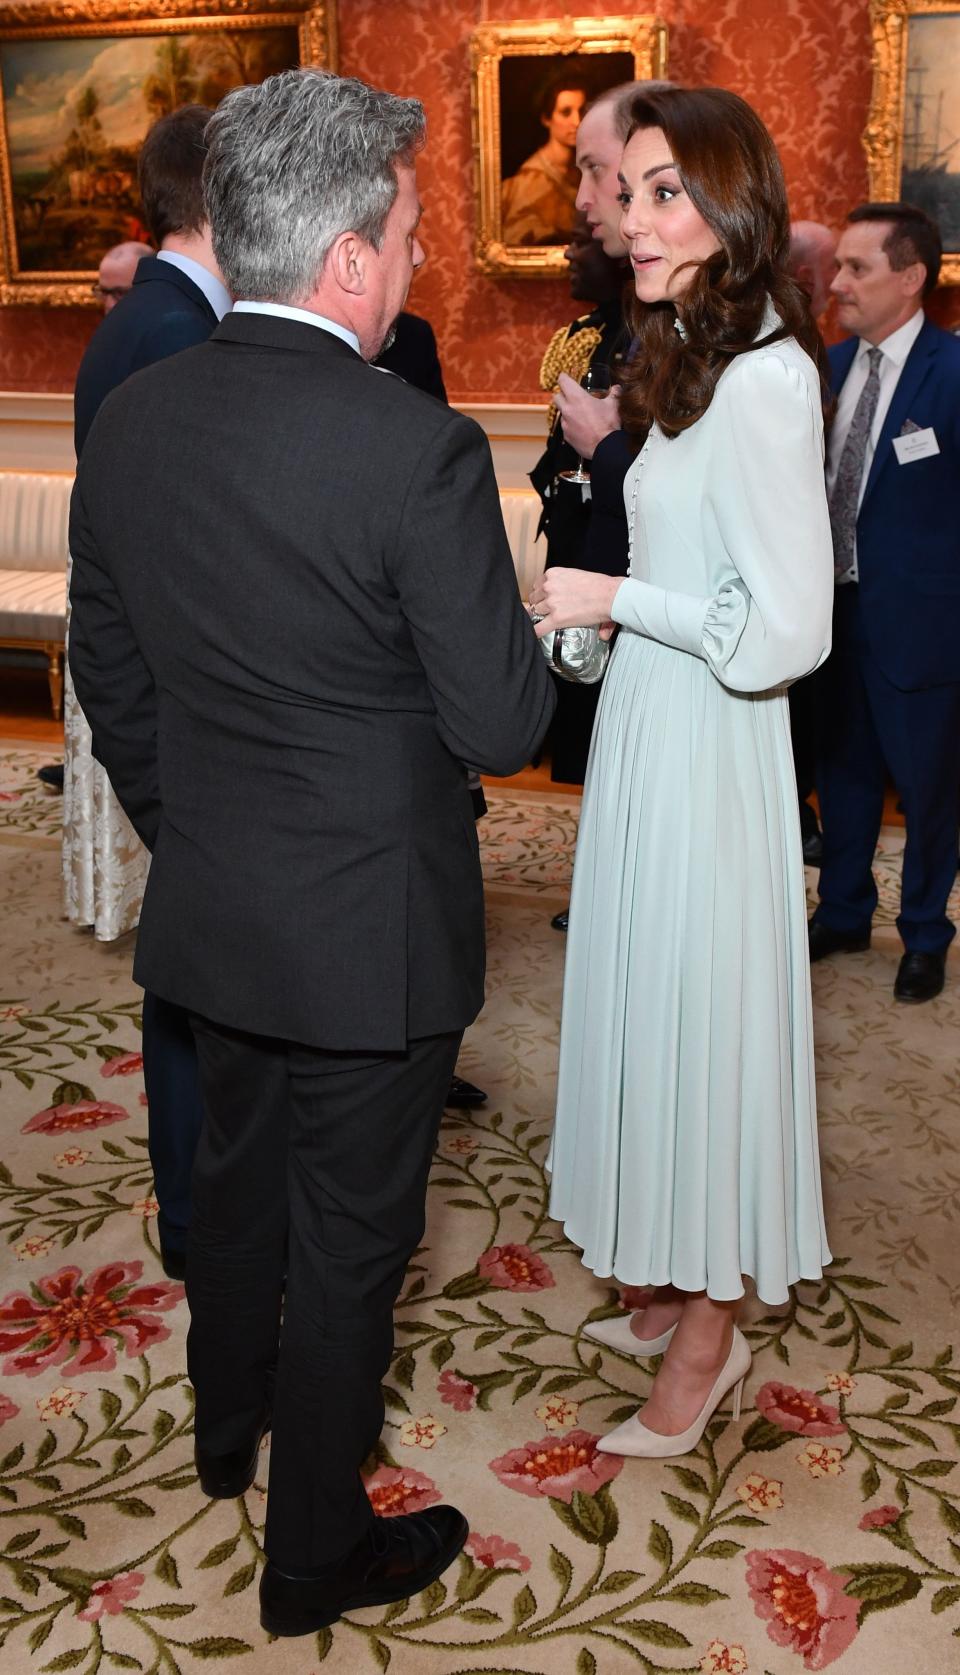 A better look at the Duchess of Cambridge's gorgeous gown.&nbsp; (Photo: DOMINIC LIPINSKI via Getty Images)